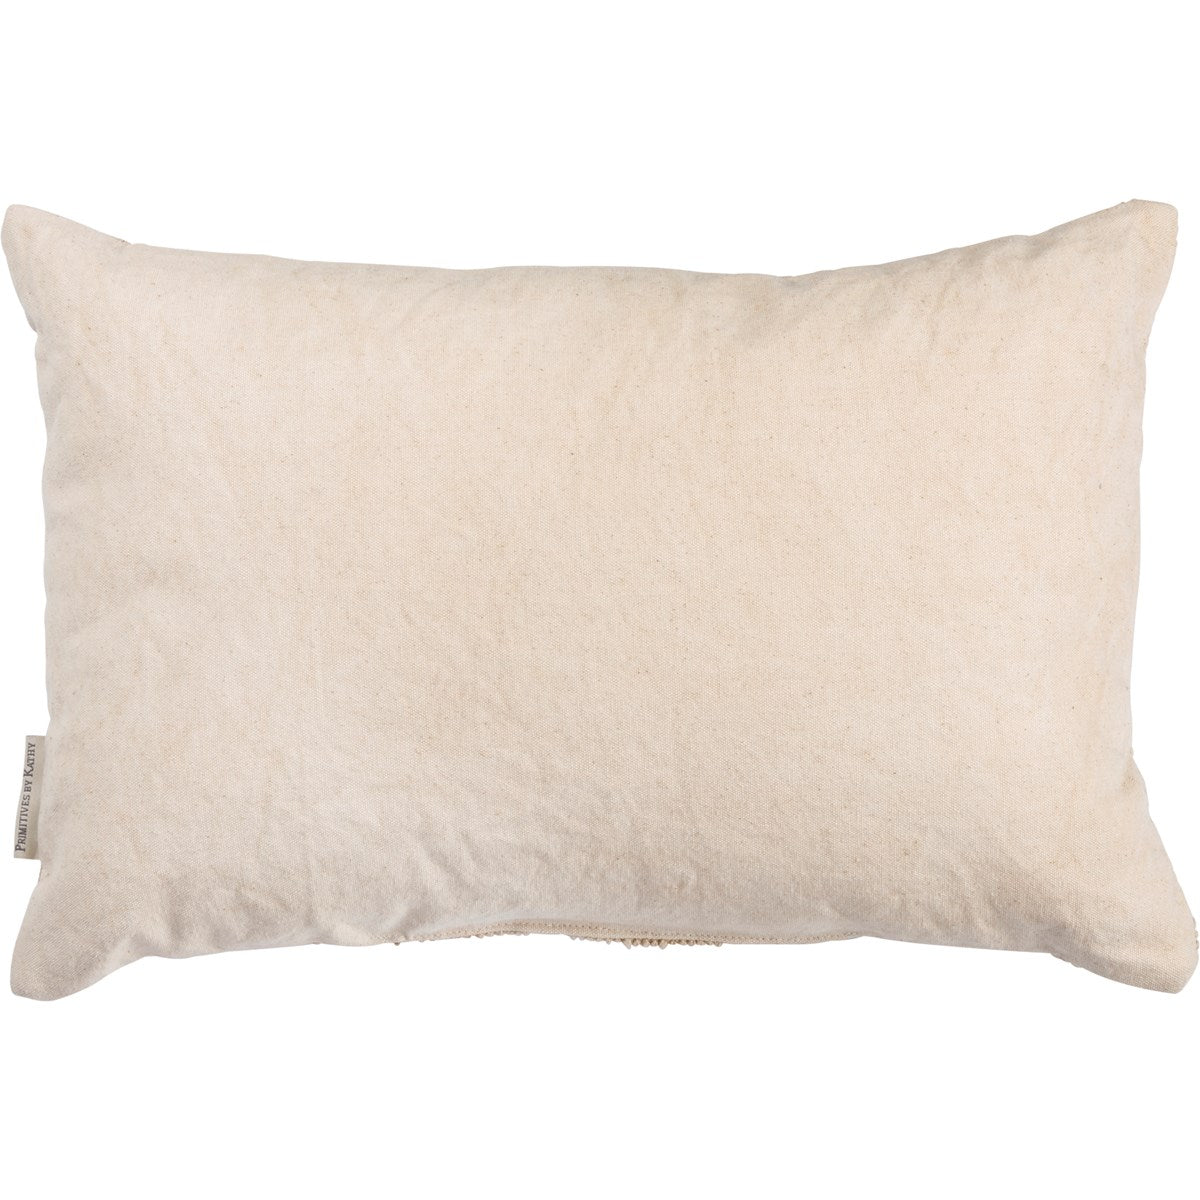 Give Thanks Knobby Lettered Cream 18" Pillow